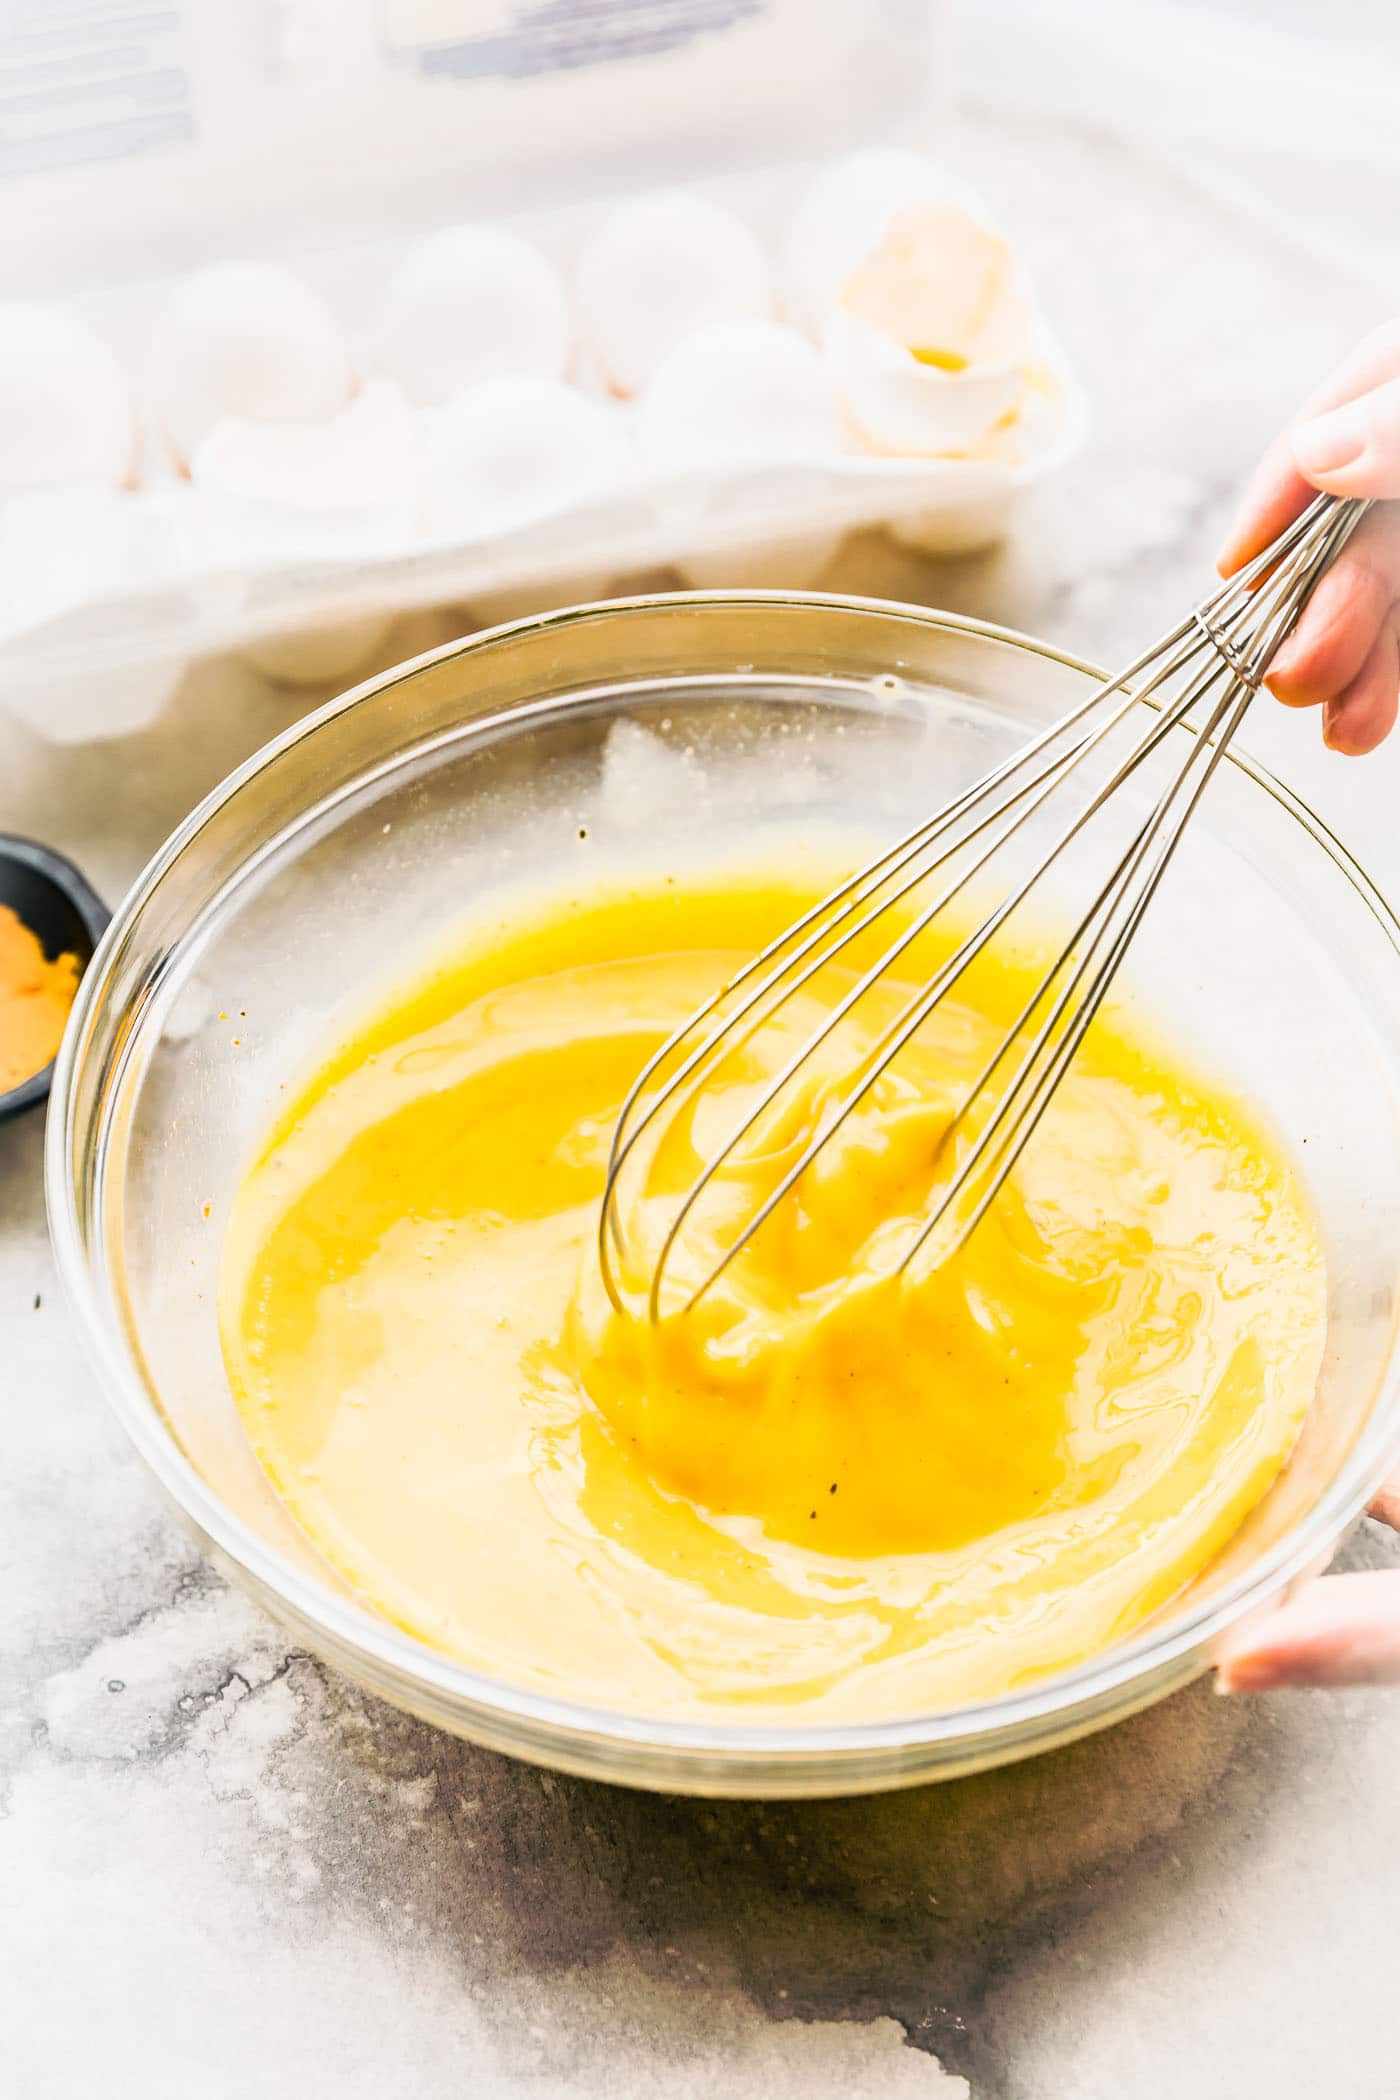 Eggs being whisked in a clear glass mixing bowl.